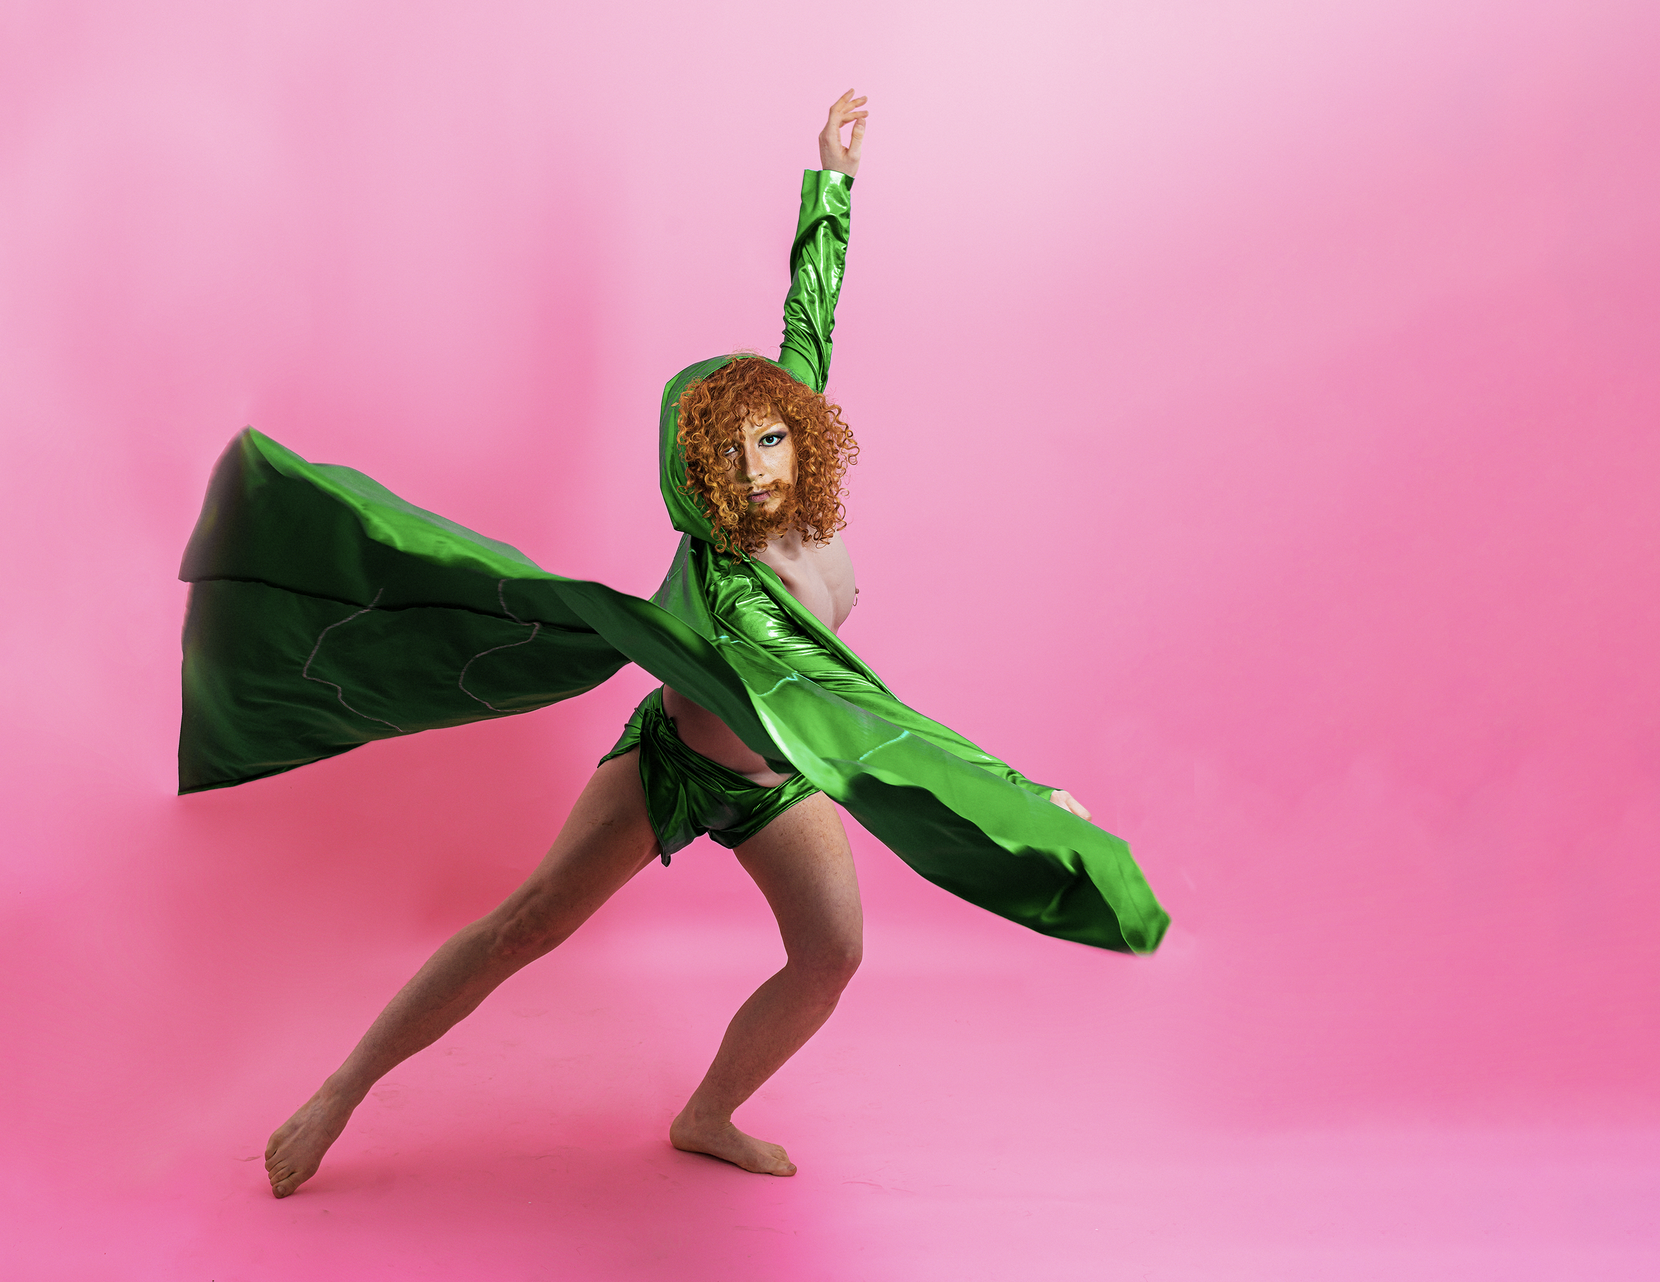 A person with red curls, a full beard and a bright green cape dances in front of a pink background.